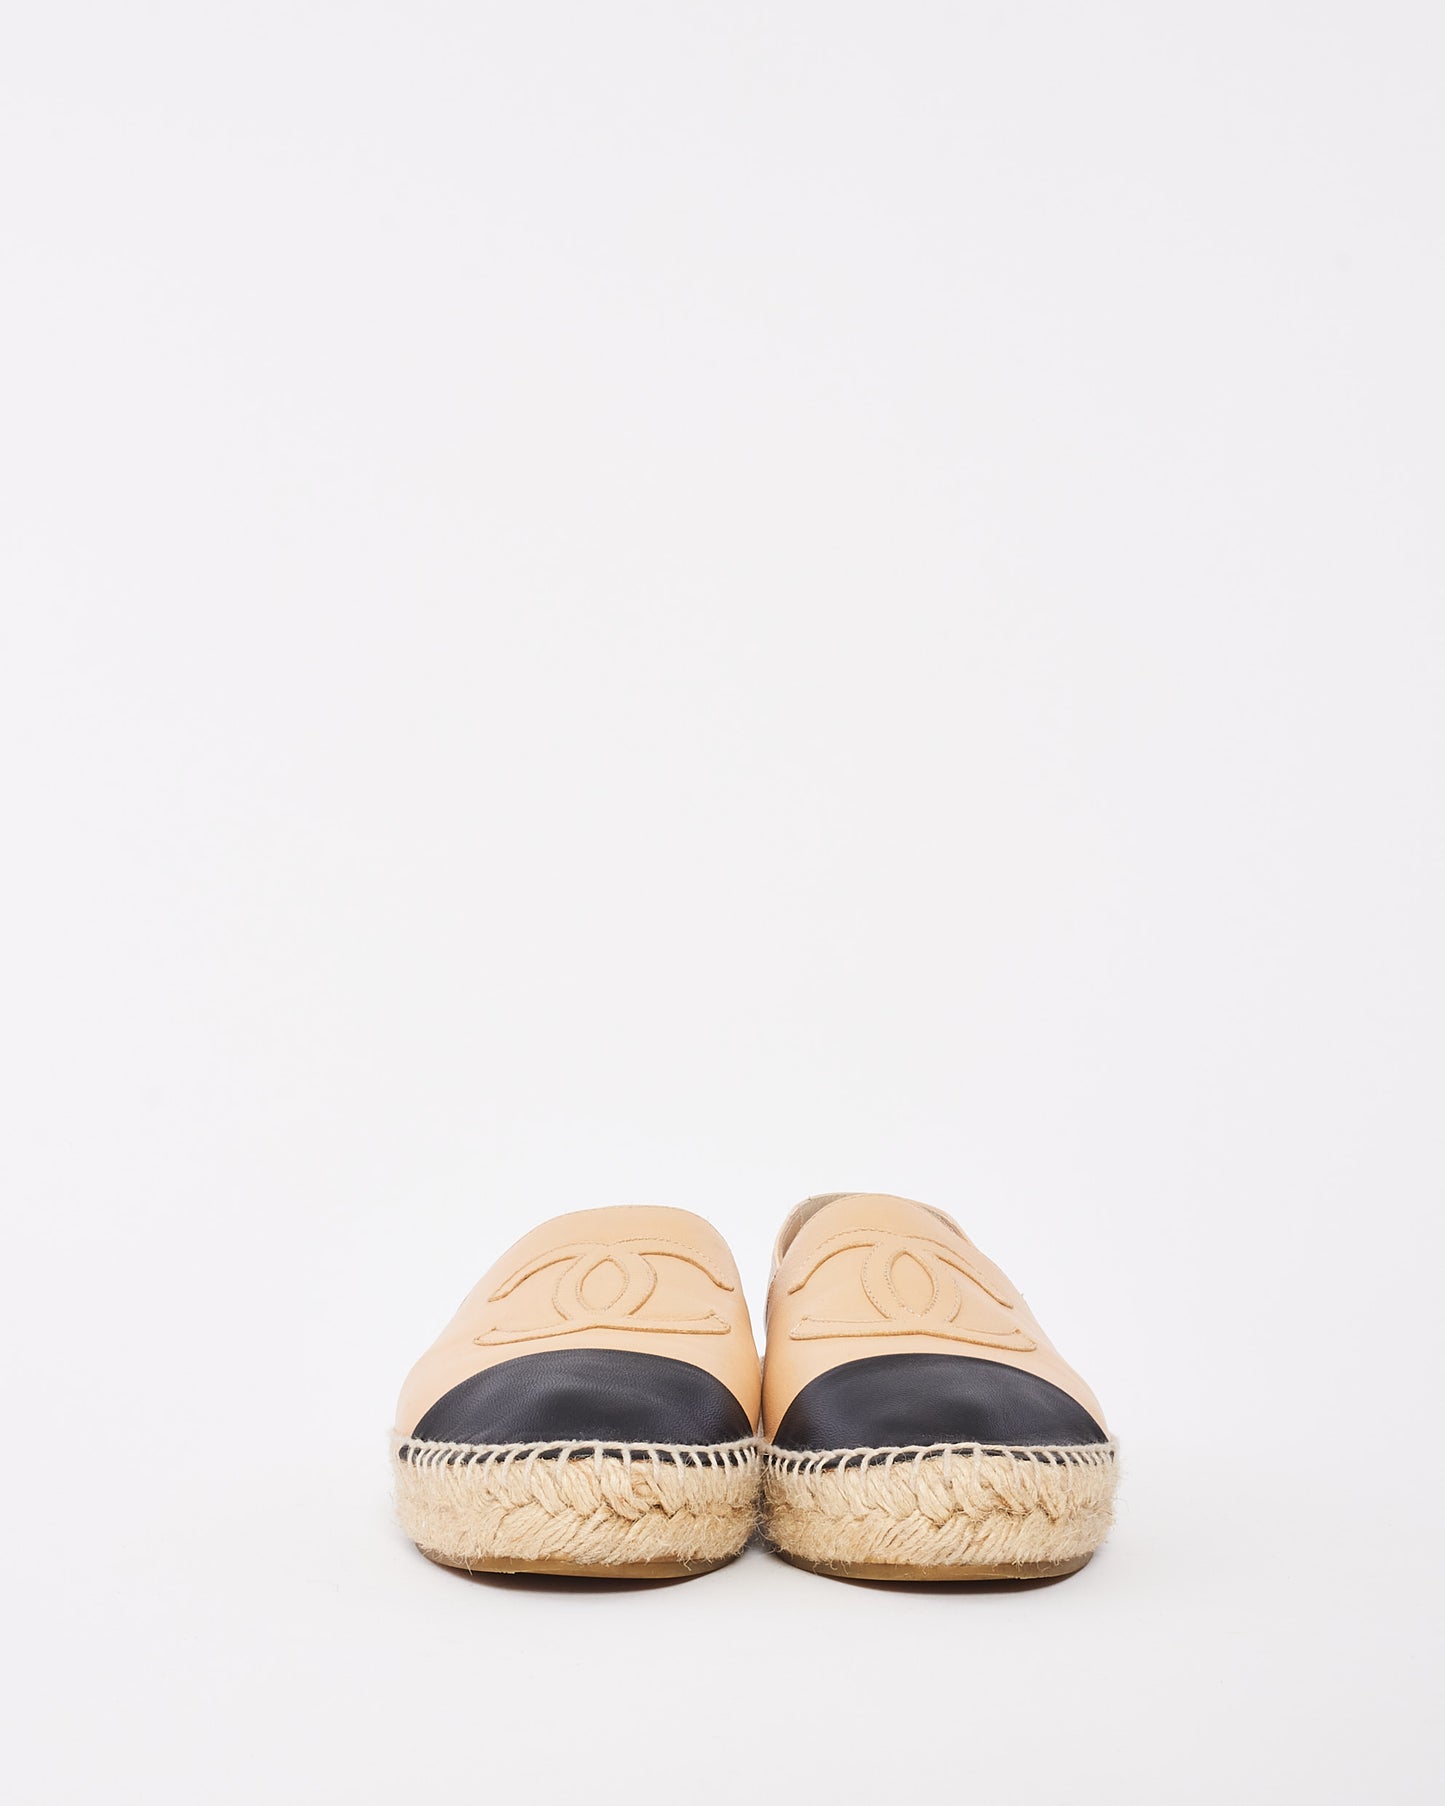 Chanel Beige Leather Espadrille Shoes - 37